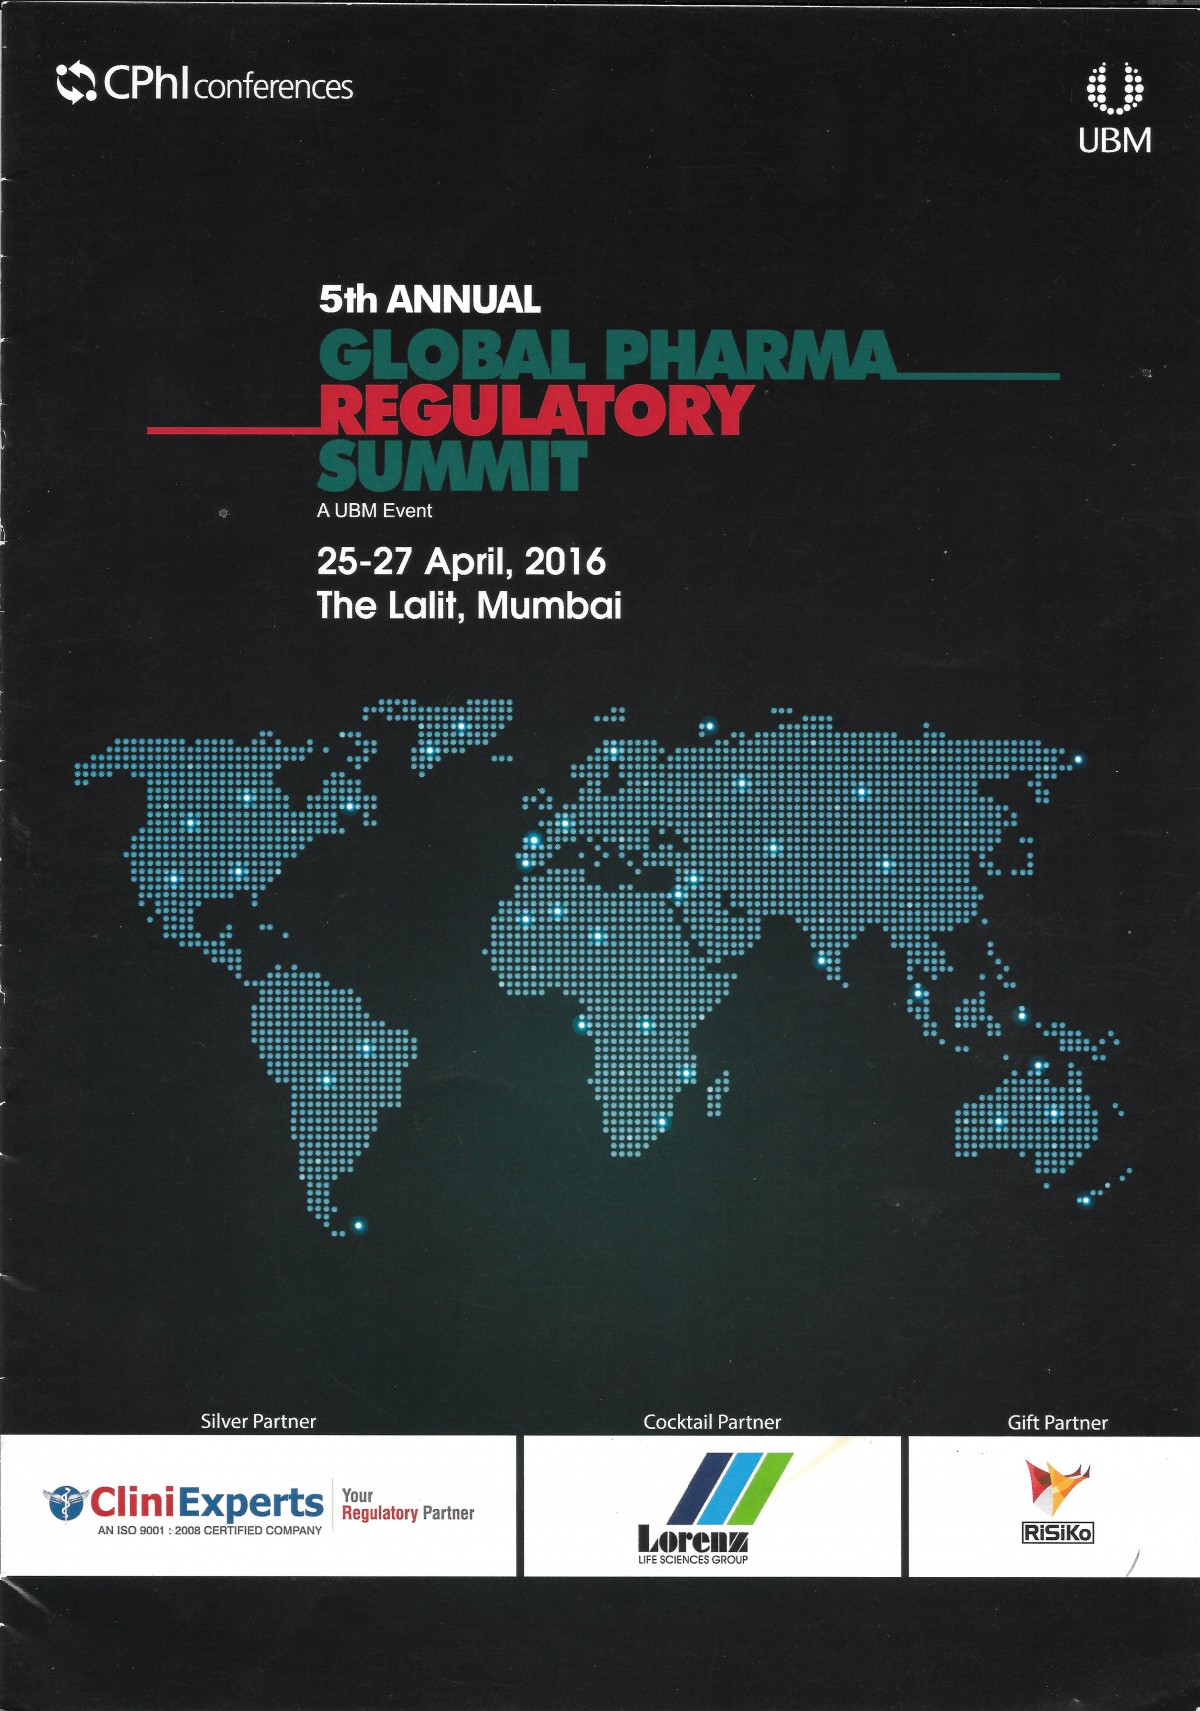 RiSiKo Consulting LLP is proud gift partner of 5th Annual Global Pharma Regulatory Summit 2016